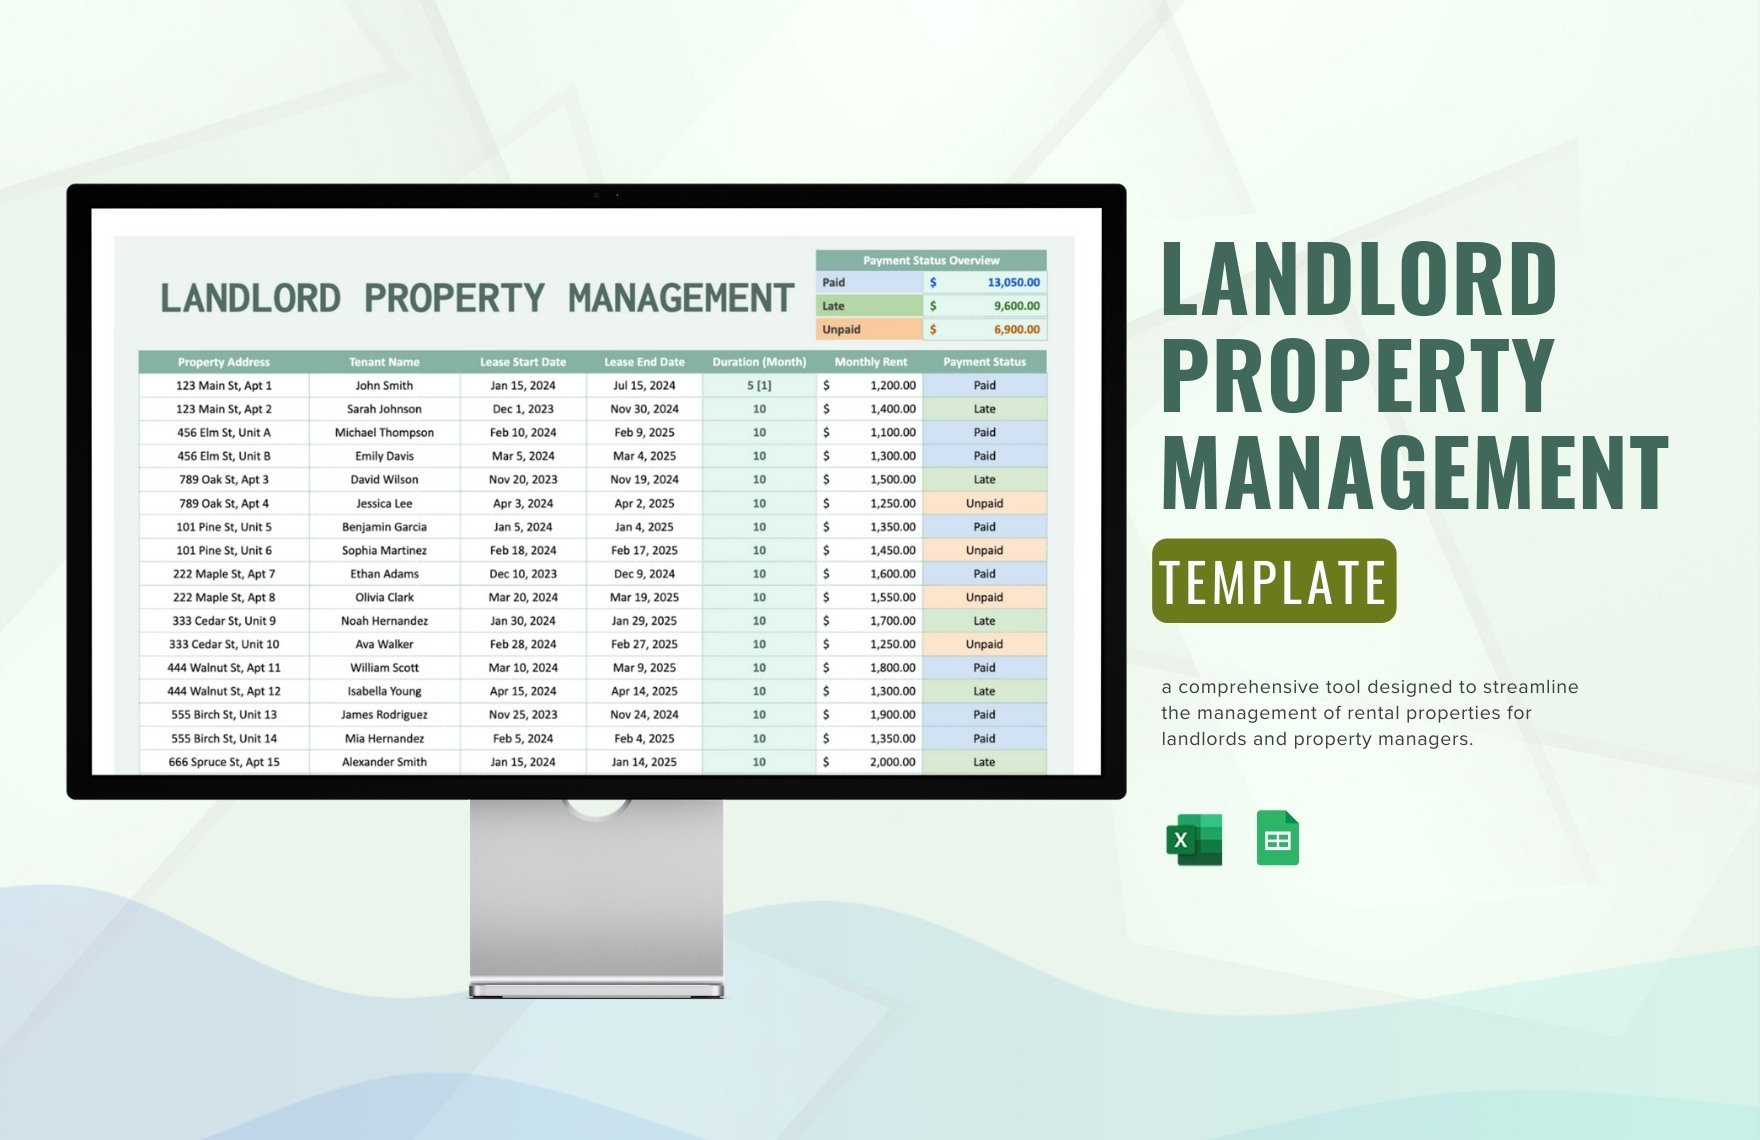 Landlord Property Management Template in Excel, Google Sheets